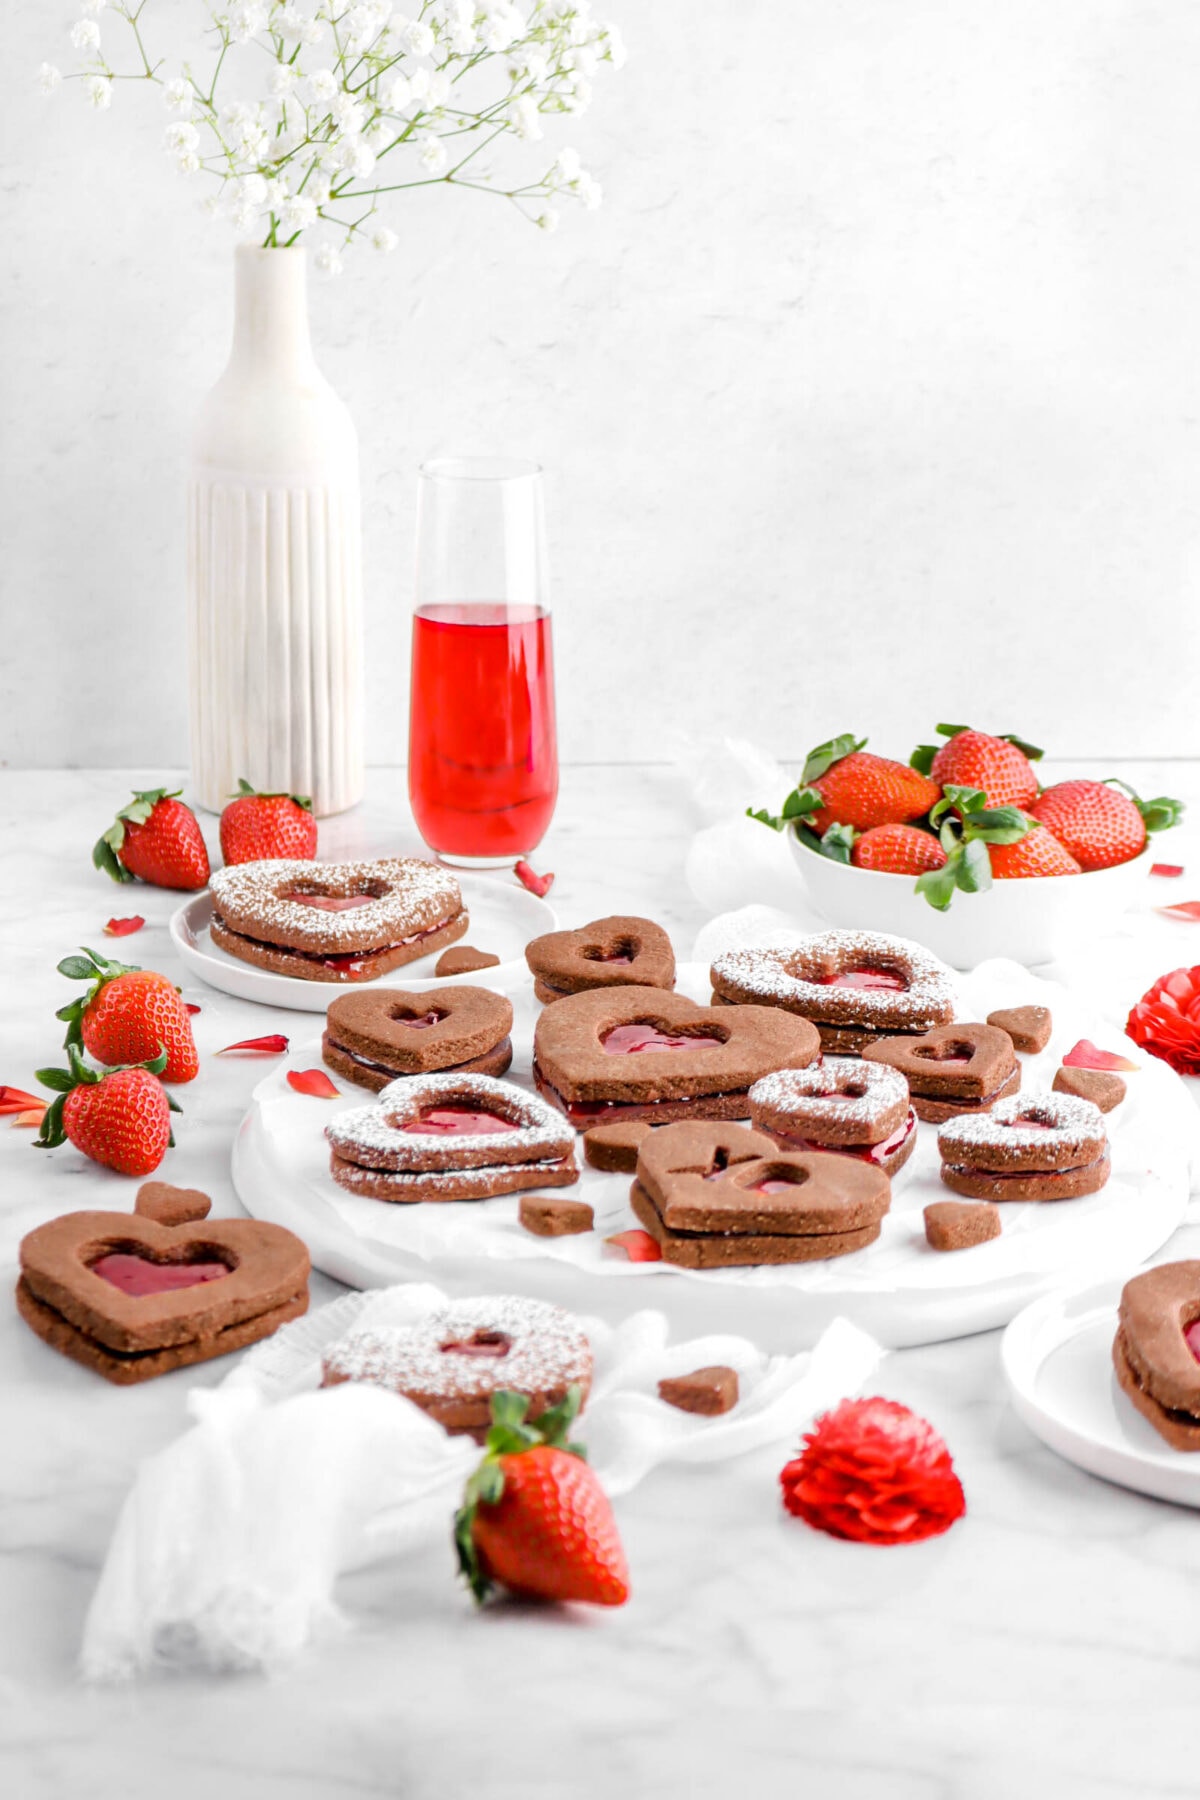 front shot of chocolate linzer cookies with strawberries, glass of wine, vase of flowers, and white cheese chloth